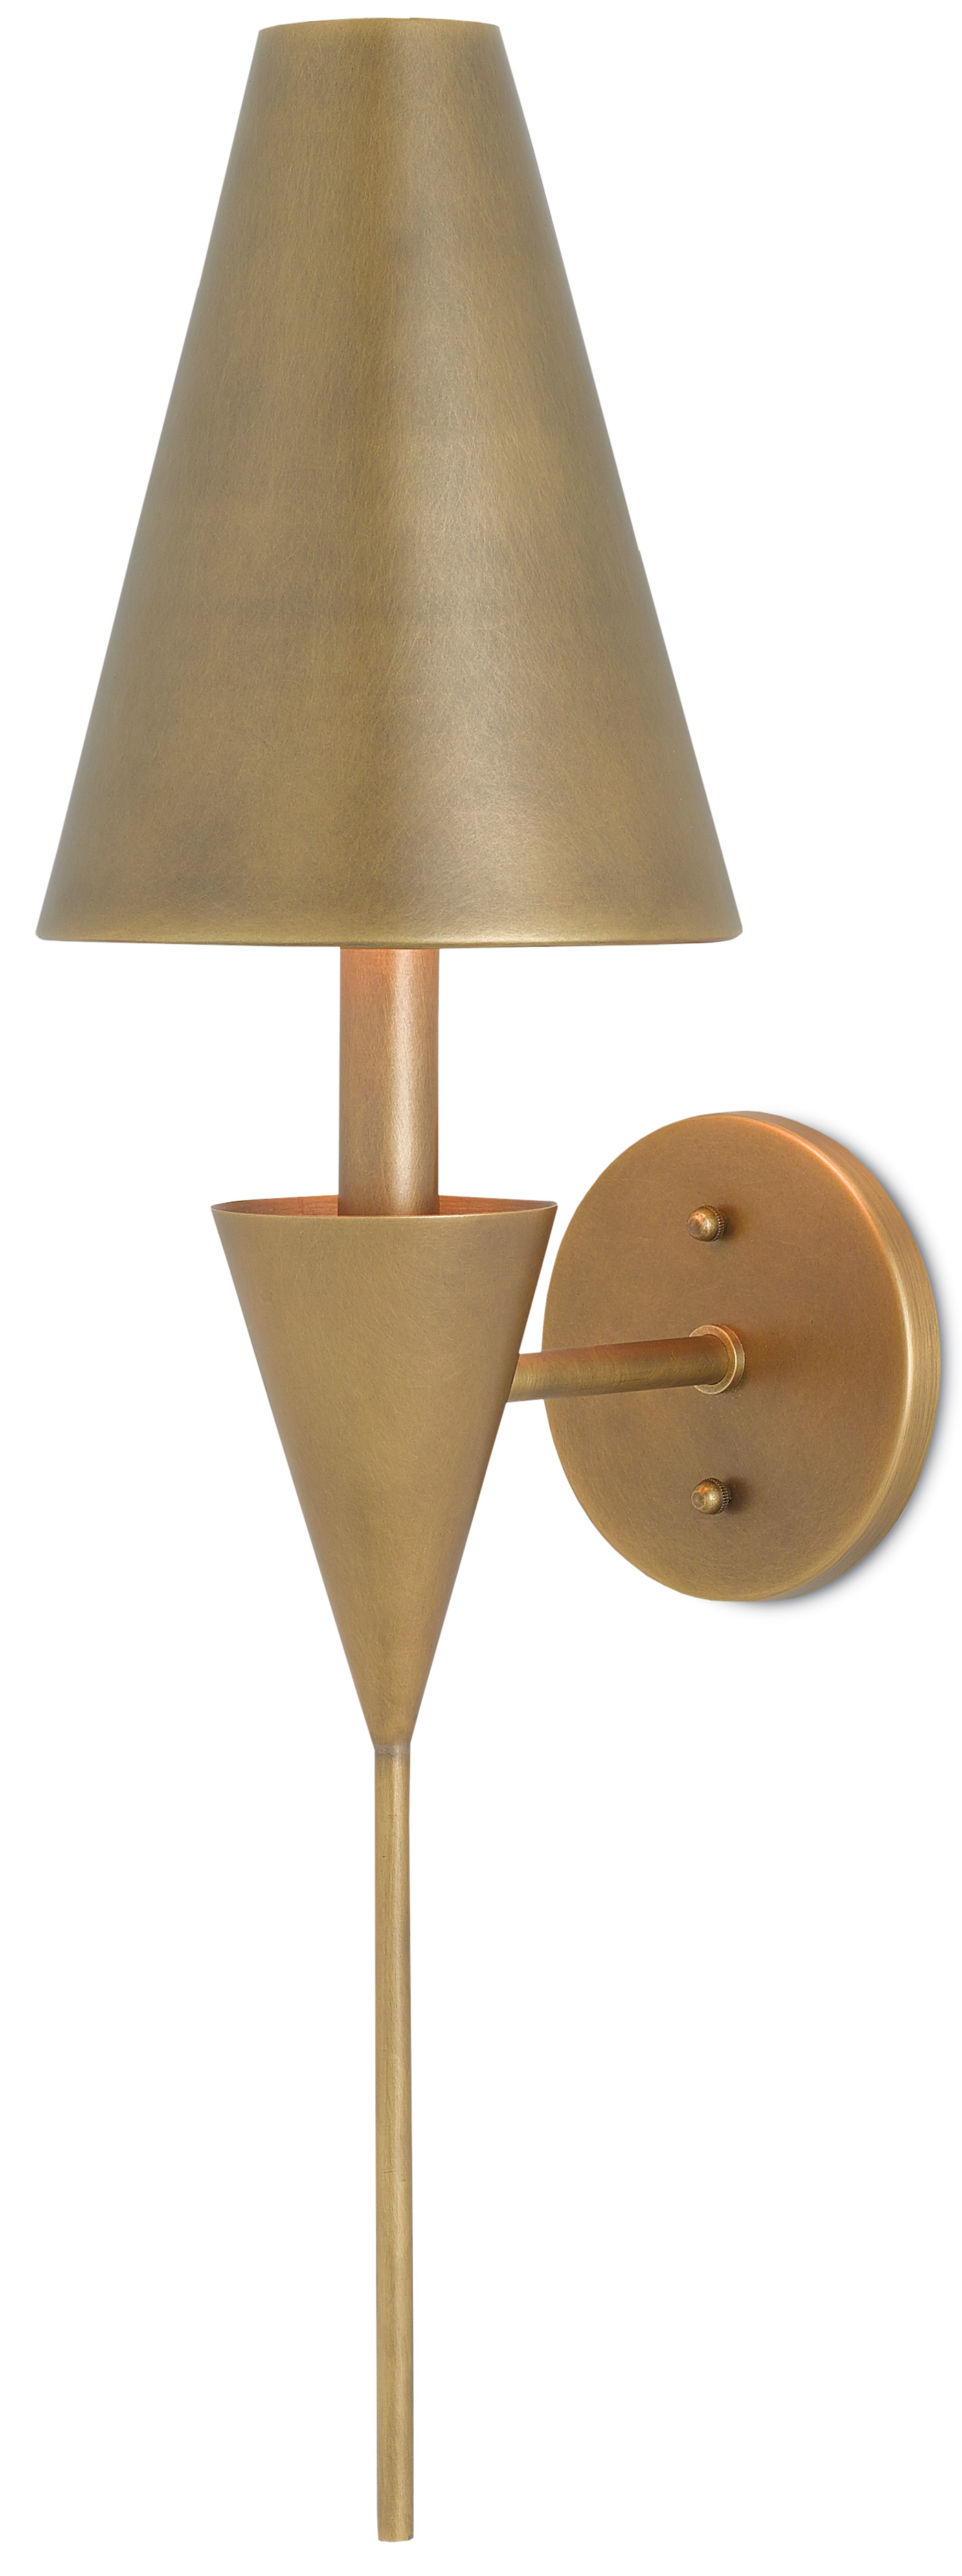 Girault wall sconce in brass from Currey & Co.